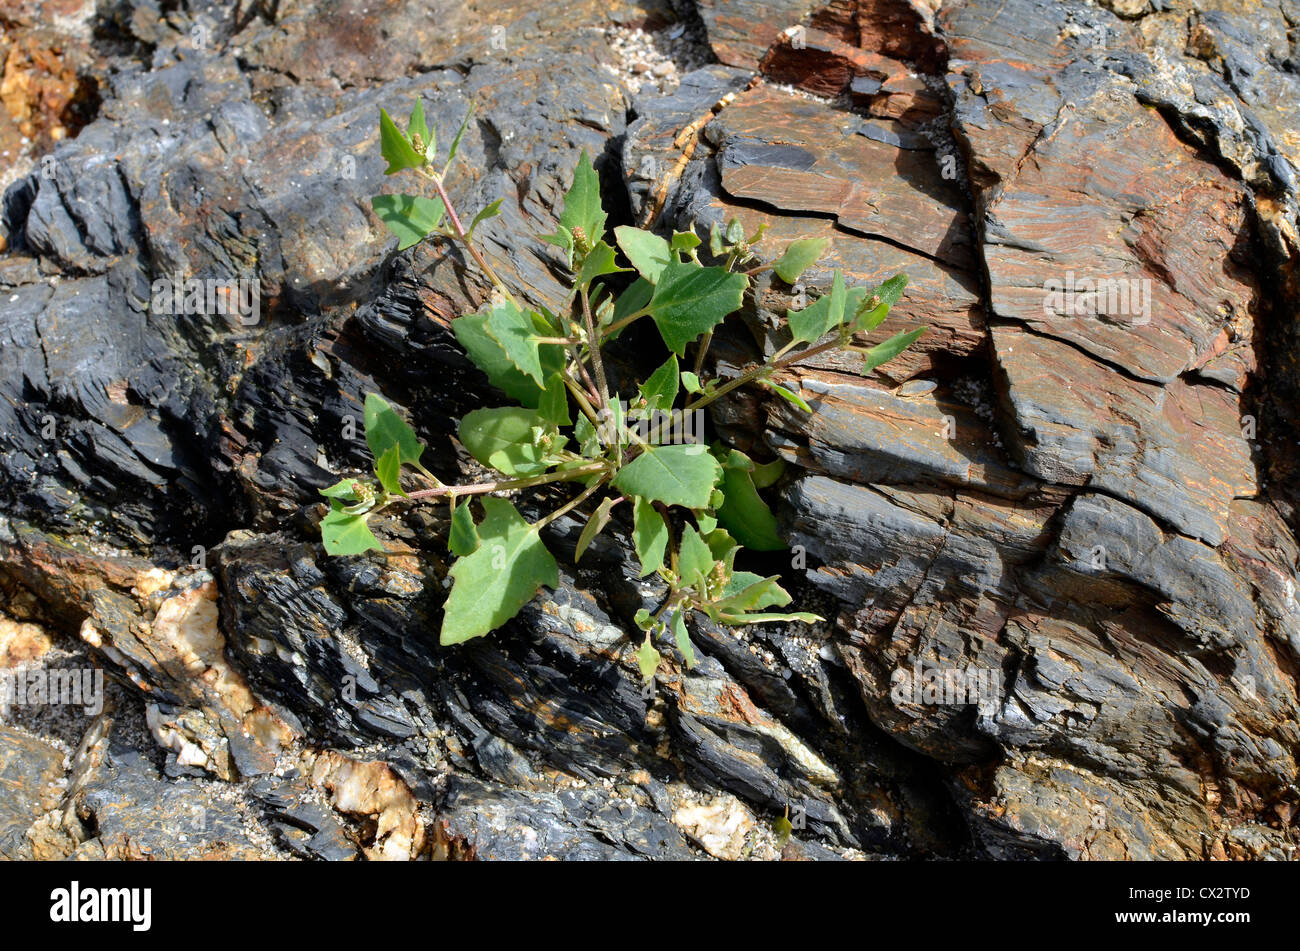 Believed to be the Spear-leaved Orache / Atriplex hastata. Young leaves may be foraged and eaten cooked. Stock Photo